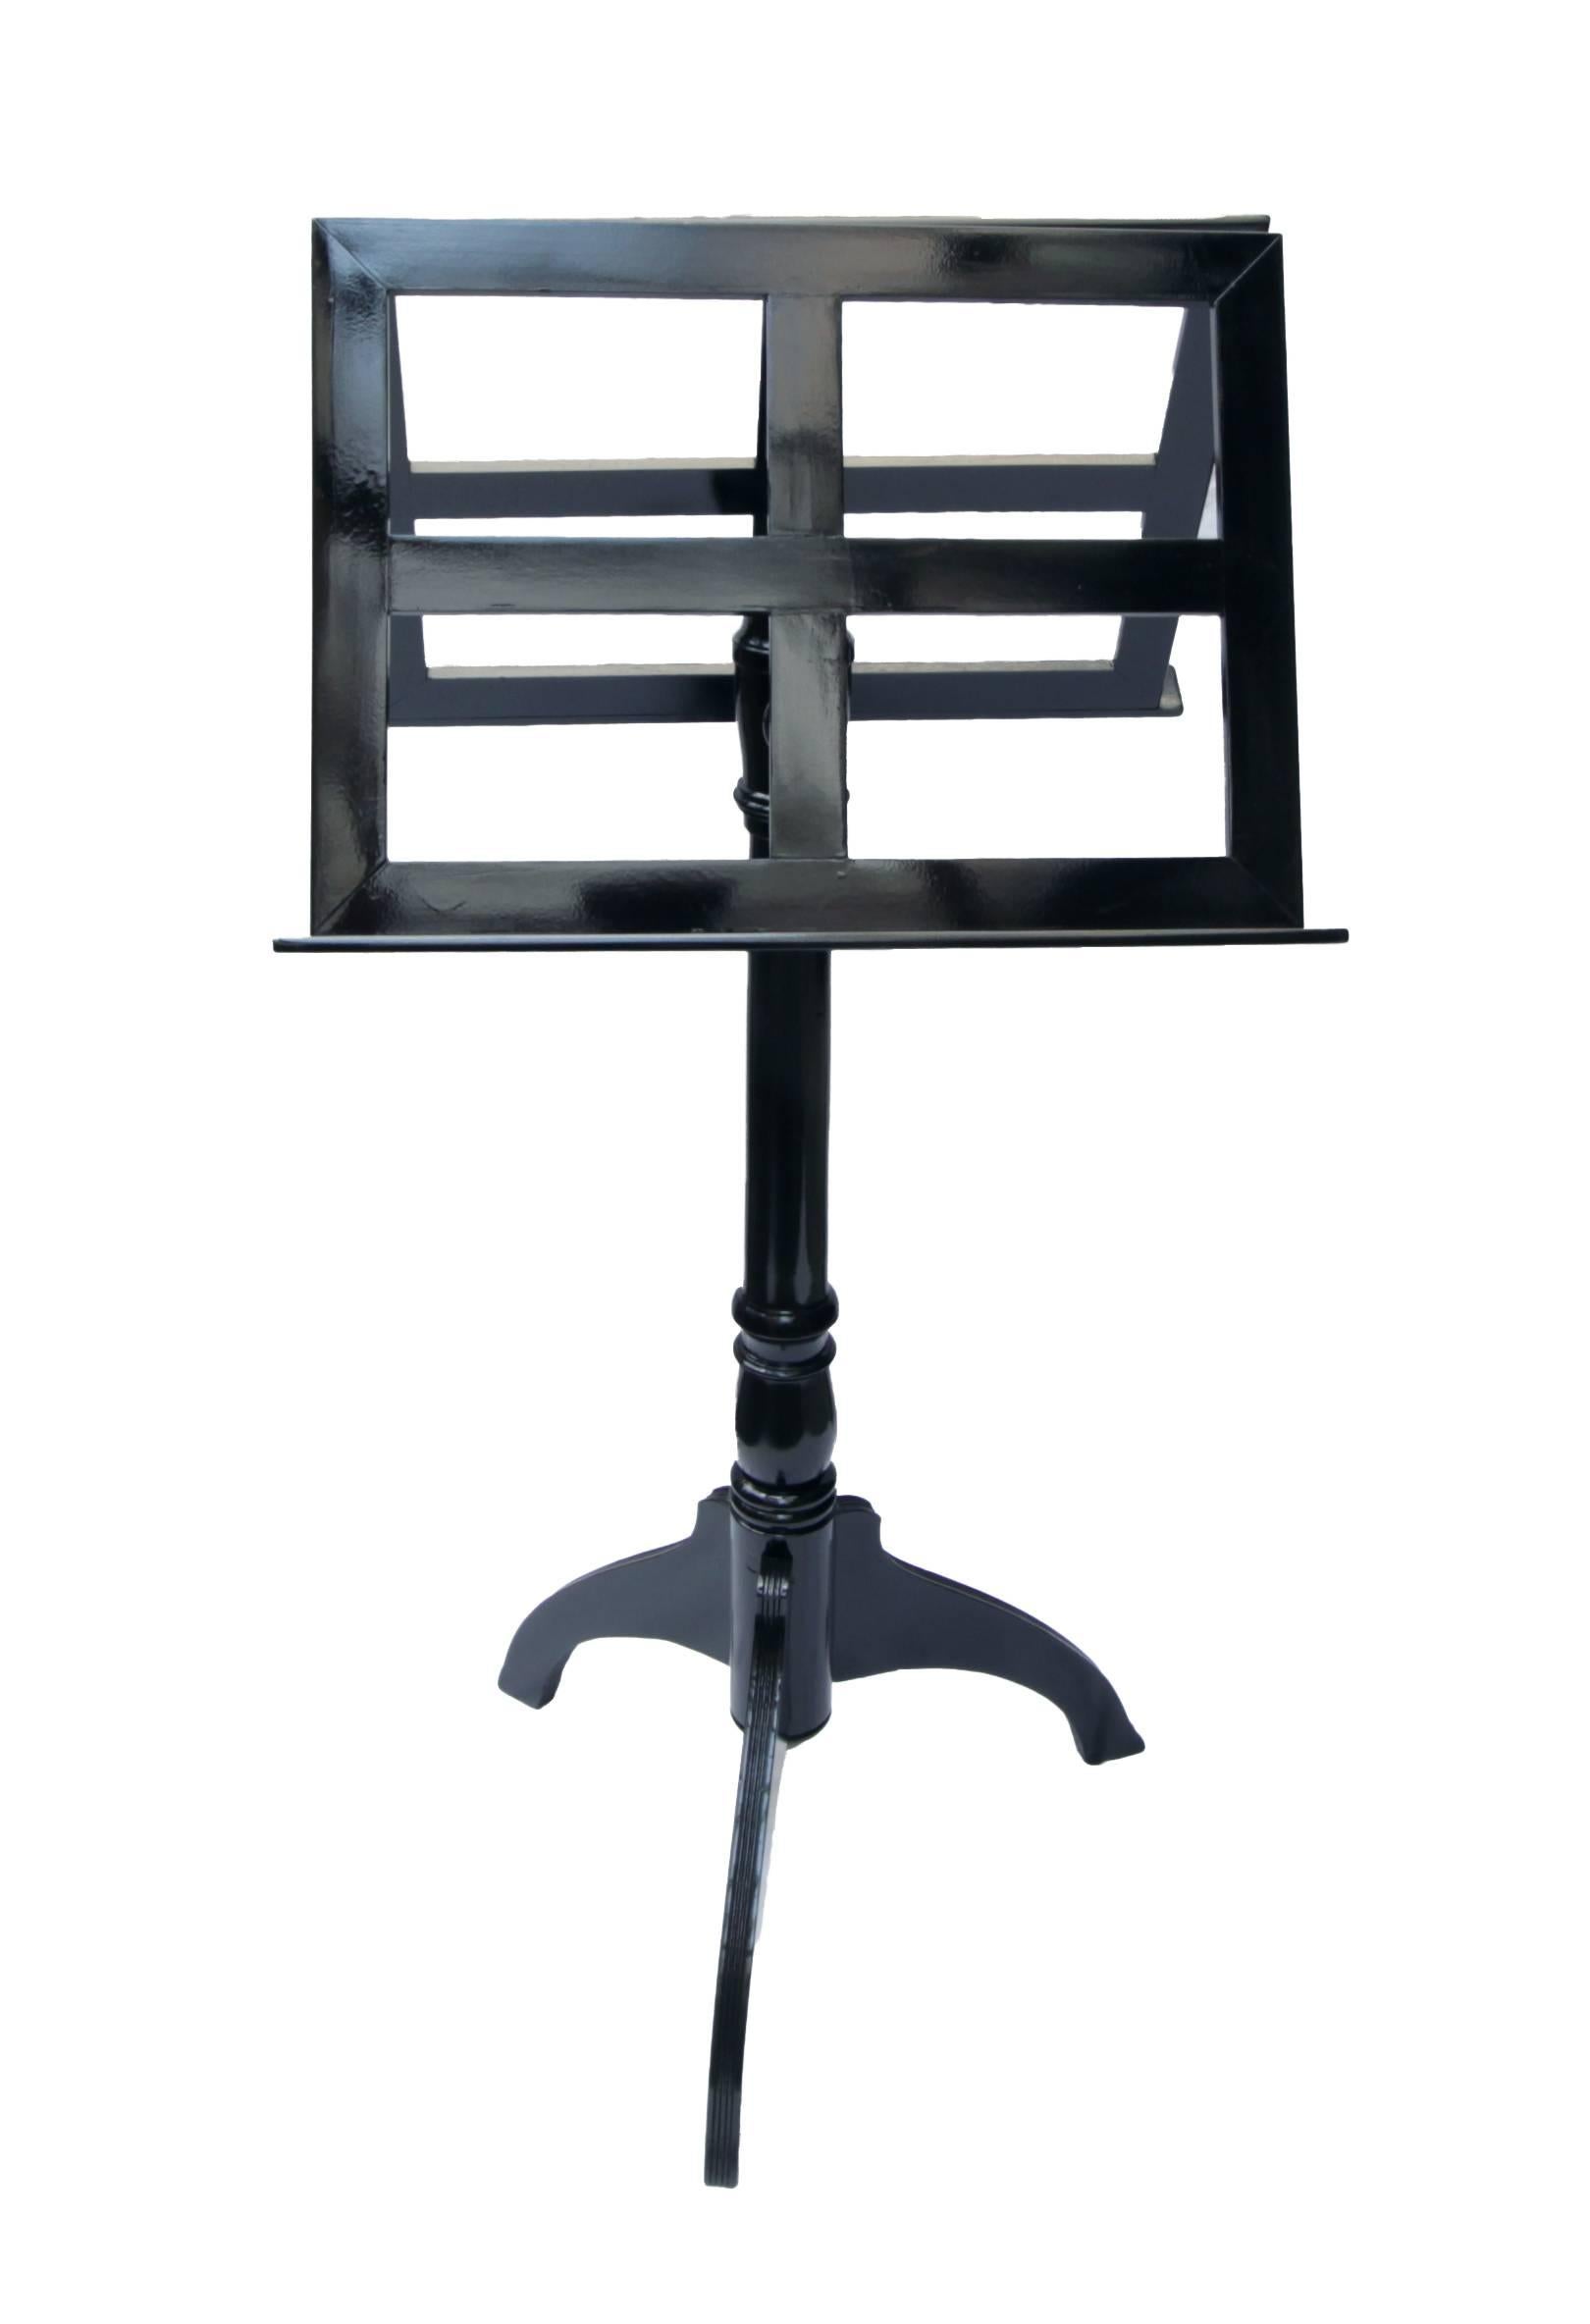 Very nice ebonized Art Nouveau duet music stand. The stand is height adjustable.